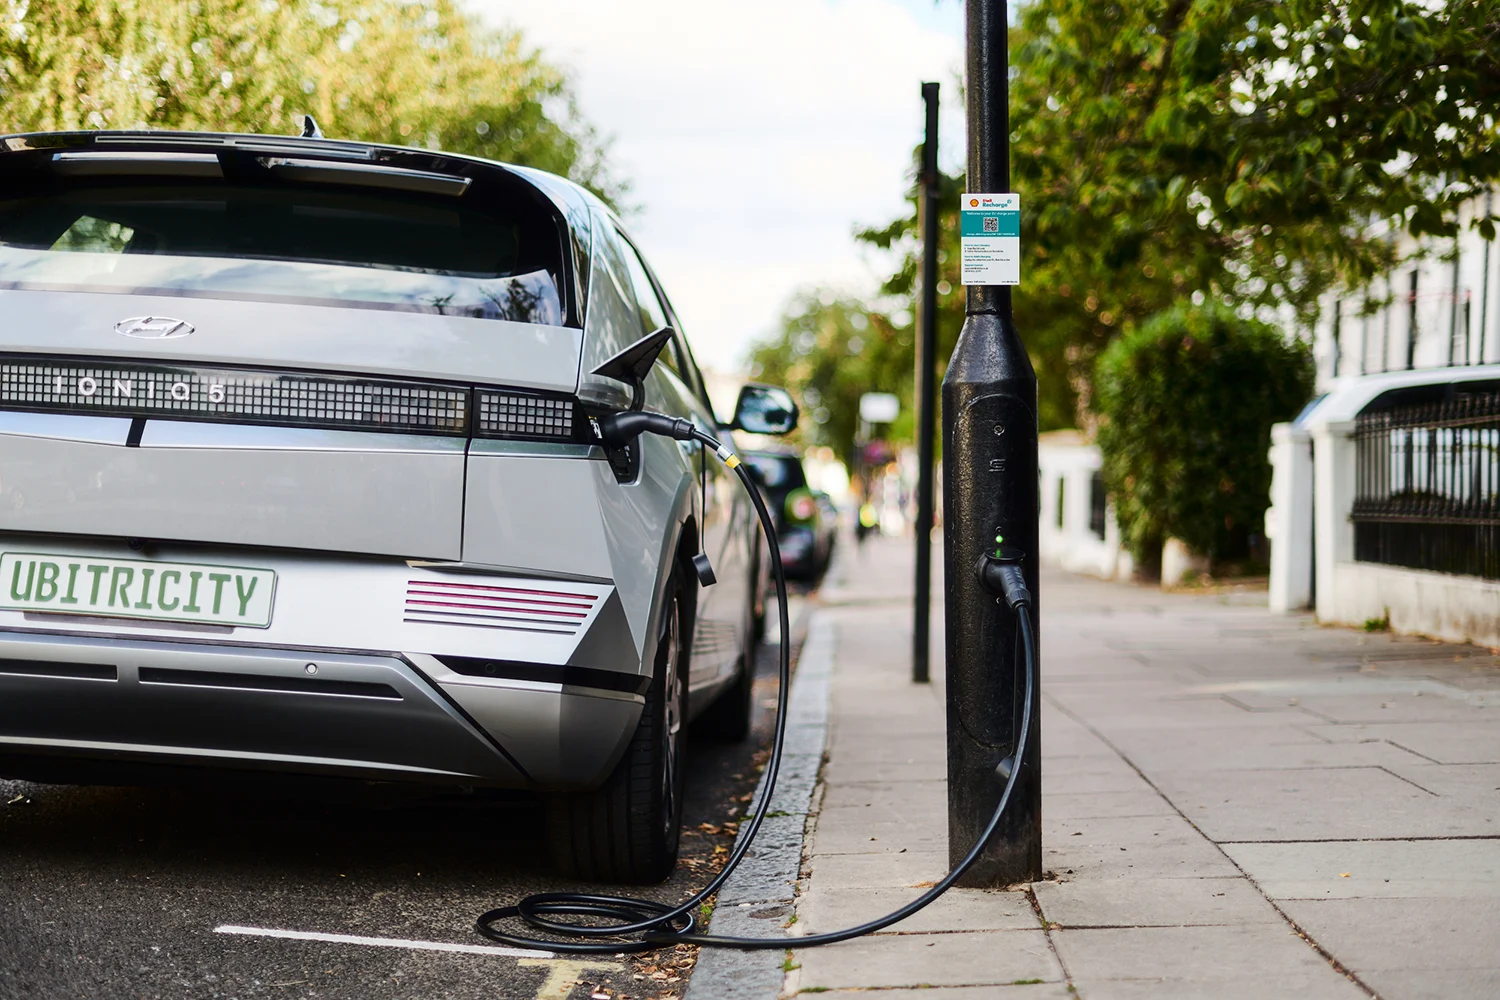 An electric vehicle is charging at a public Shell Recharge lamppost charge point, operated by Shell's subsidiary ubitricity.